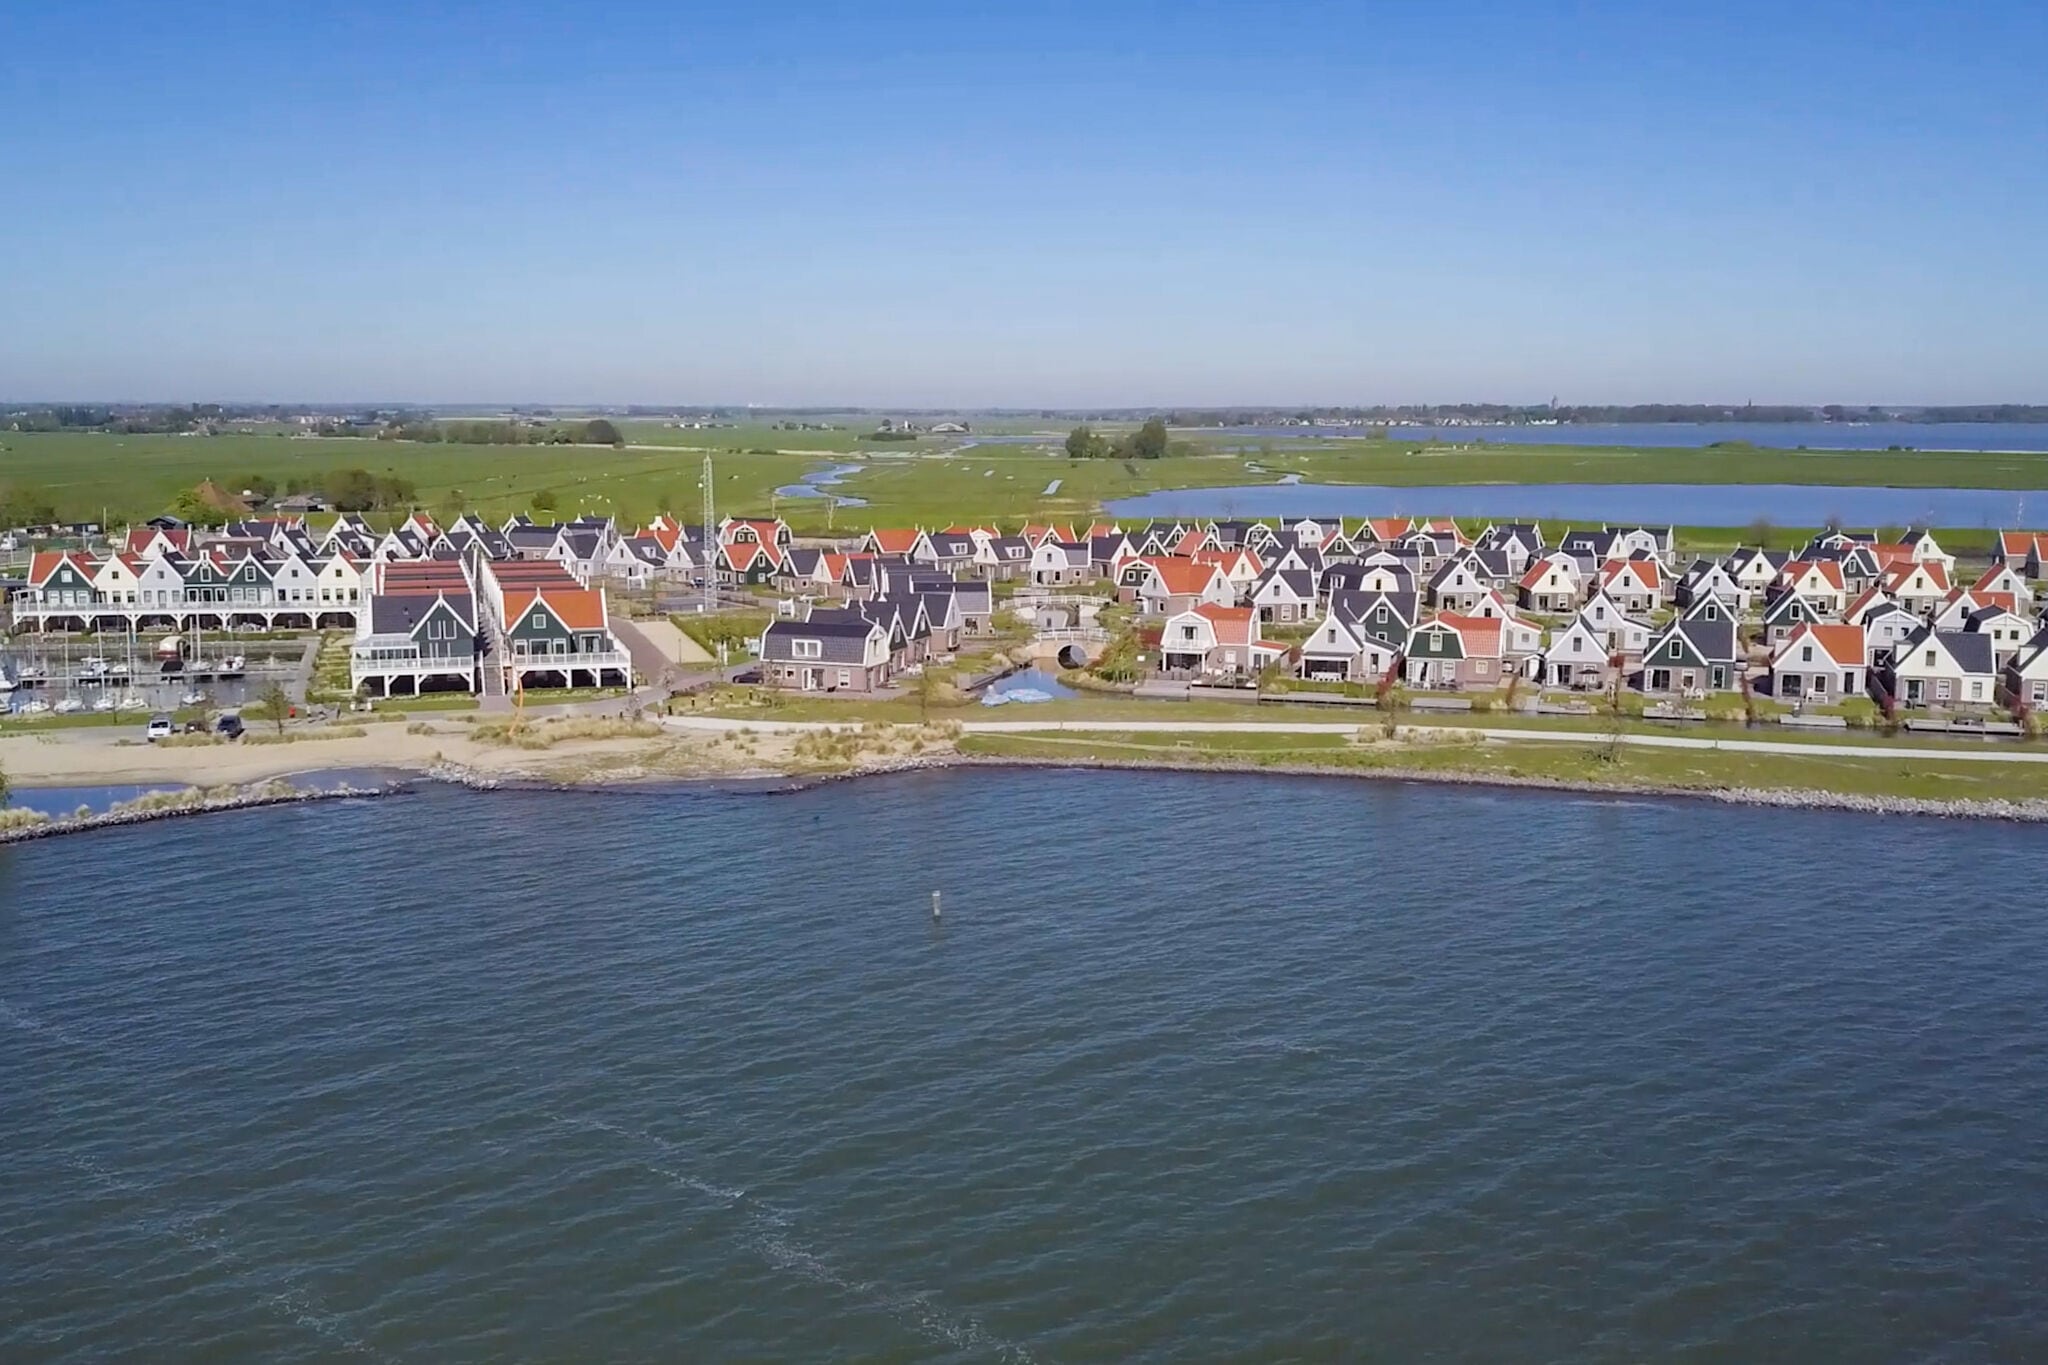 Nice holiday home on the Markermeer not far from Amsterdam